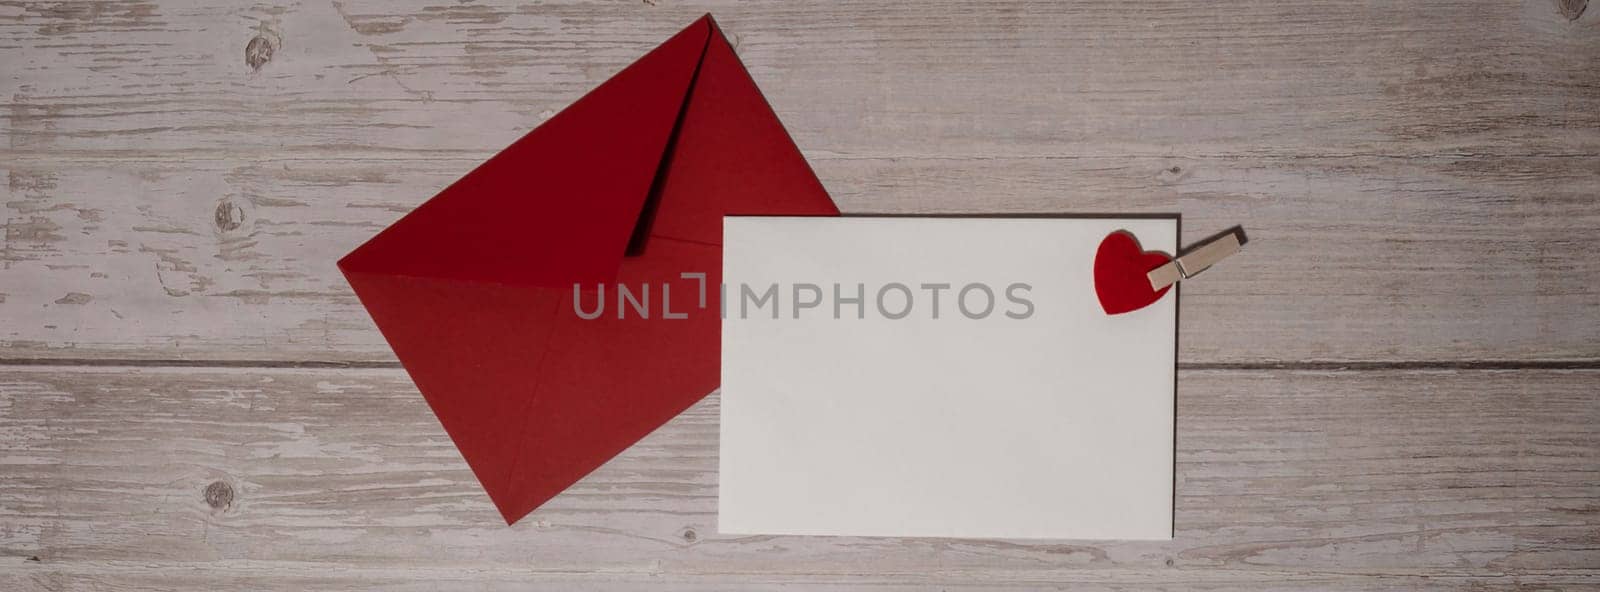 Banner Greeting or invitation card mock up with red envelope on wooden background. Romantic Small hearts Valentine day. Blank paper card copy space for your text. Holiday morning. Top view, flat lay minimalist aesthetic luxury bohemian business branding concept